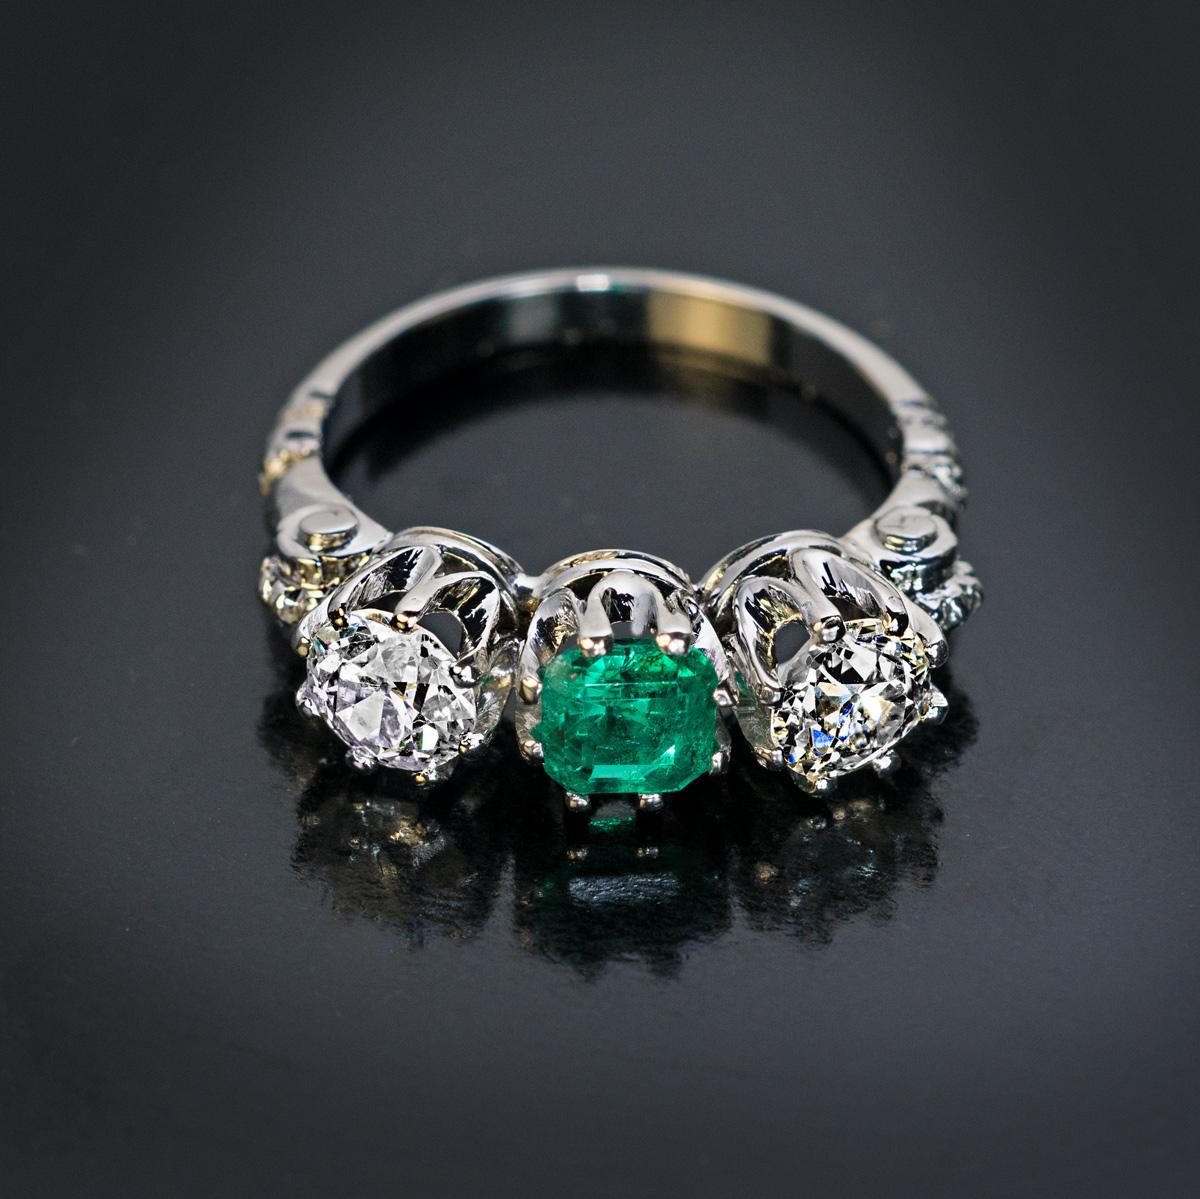 This vintage, circa 1930s, three stone engagement ring is handcrafted in platinum. The ring is centered with a square natural emerald of a vivid bluish green color flanked by two sparkling bright white old European cut diamonds (G-H color, VS2/SI2